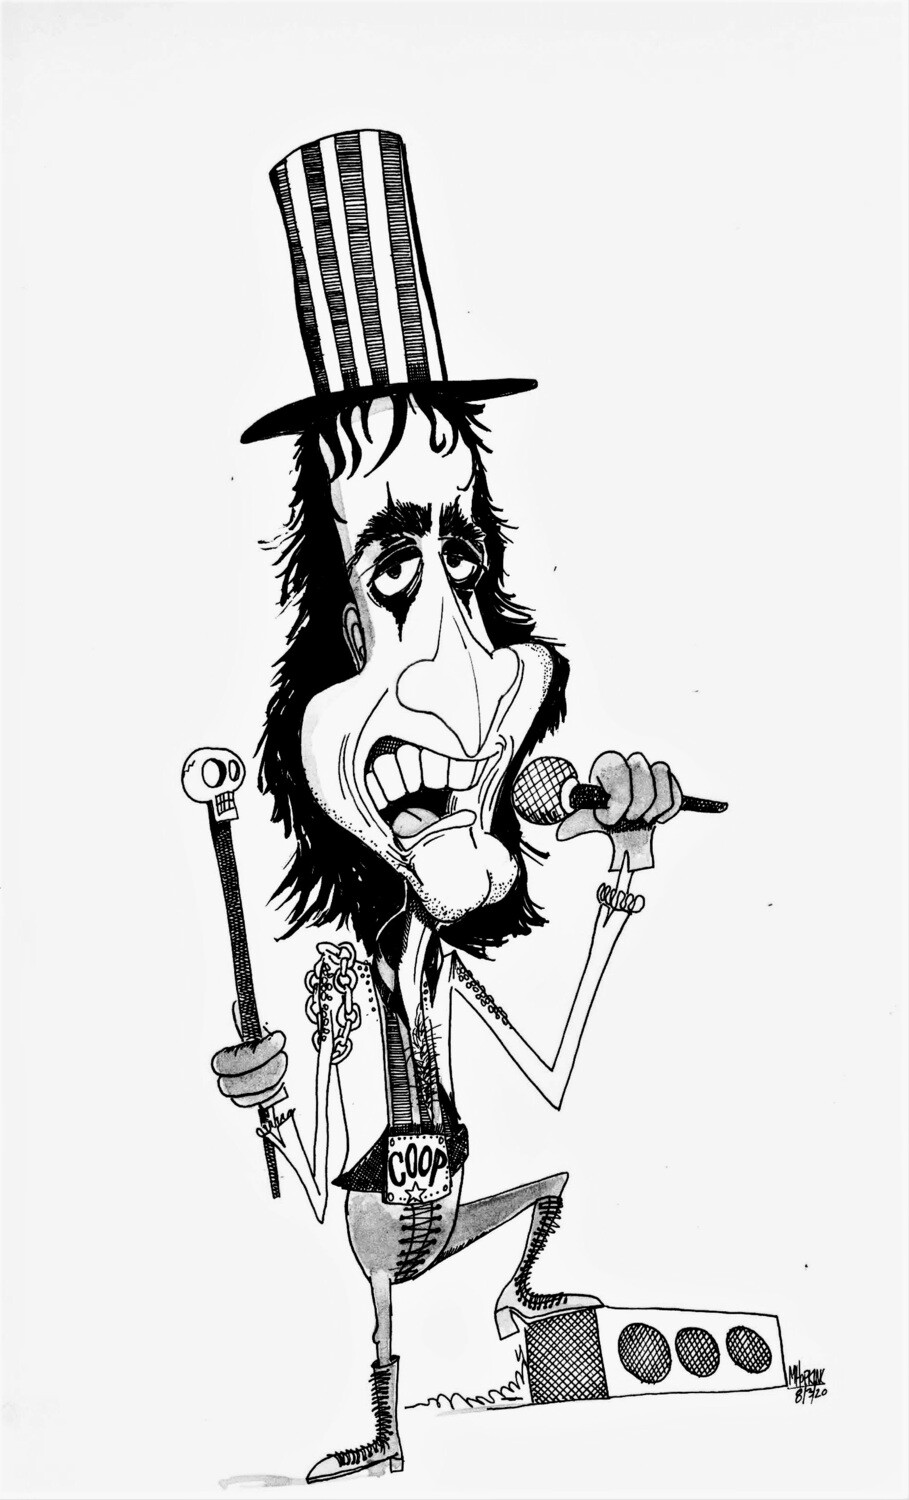 Alice Cooper - Limited Edition  Giclée Prints from $75 to $100